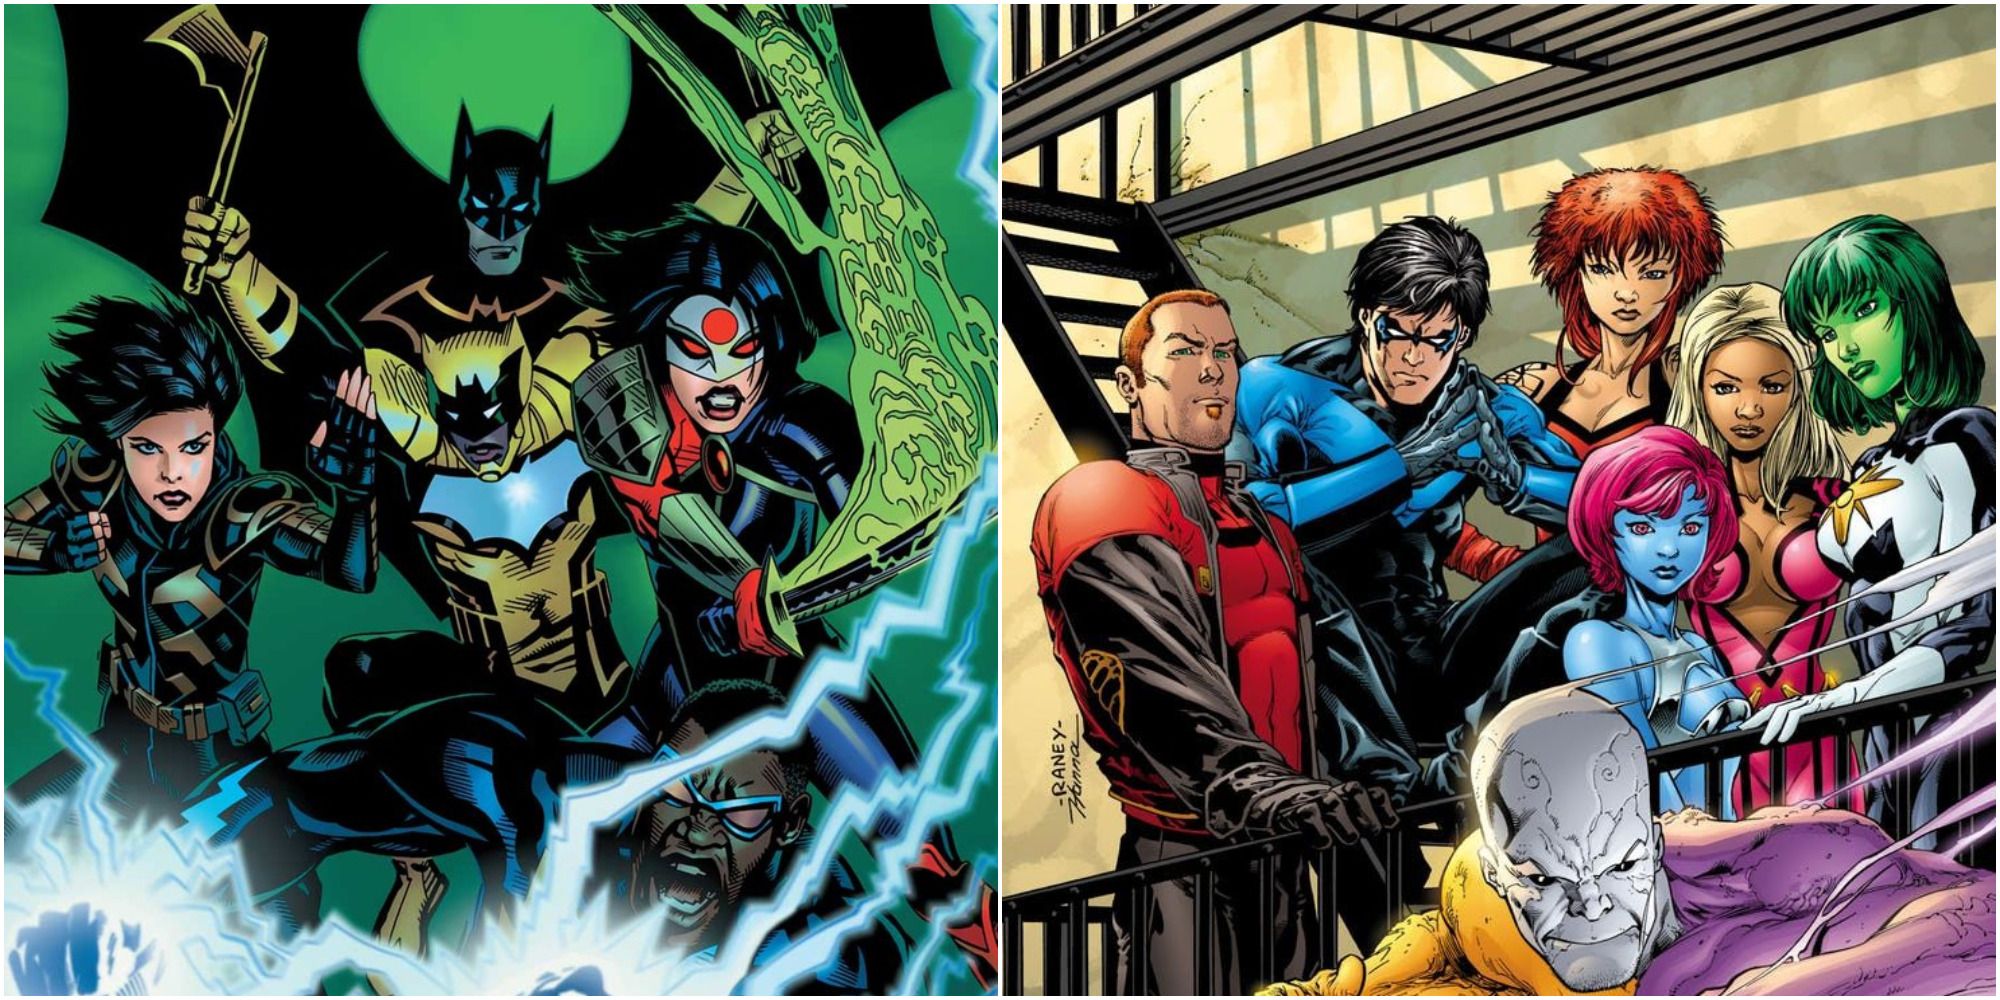 Batman and Nightwing's Outsiders